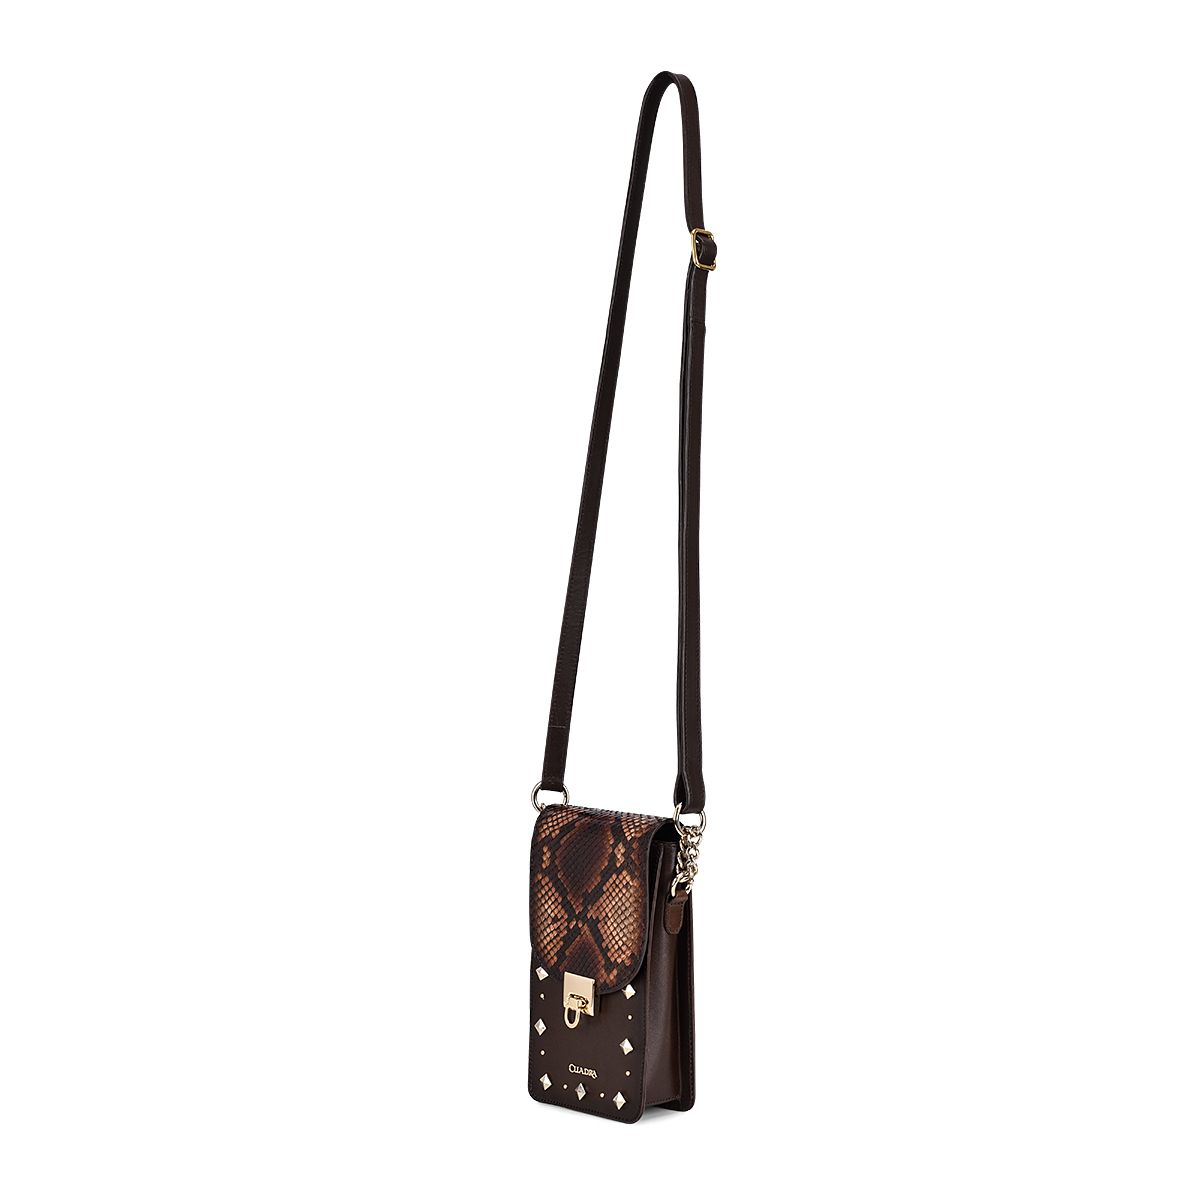 The bag comes with a versatile long strap. So it allows you to wear it crossbody or over your shoulder